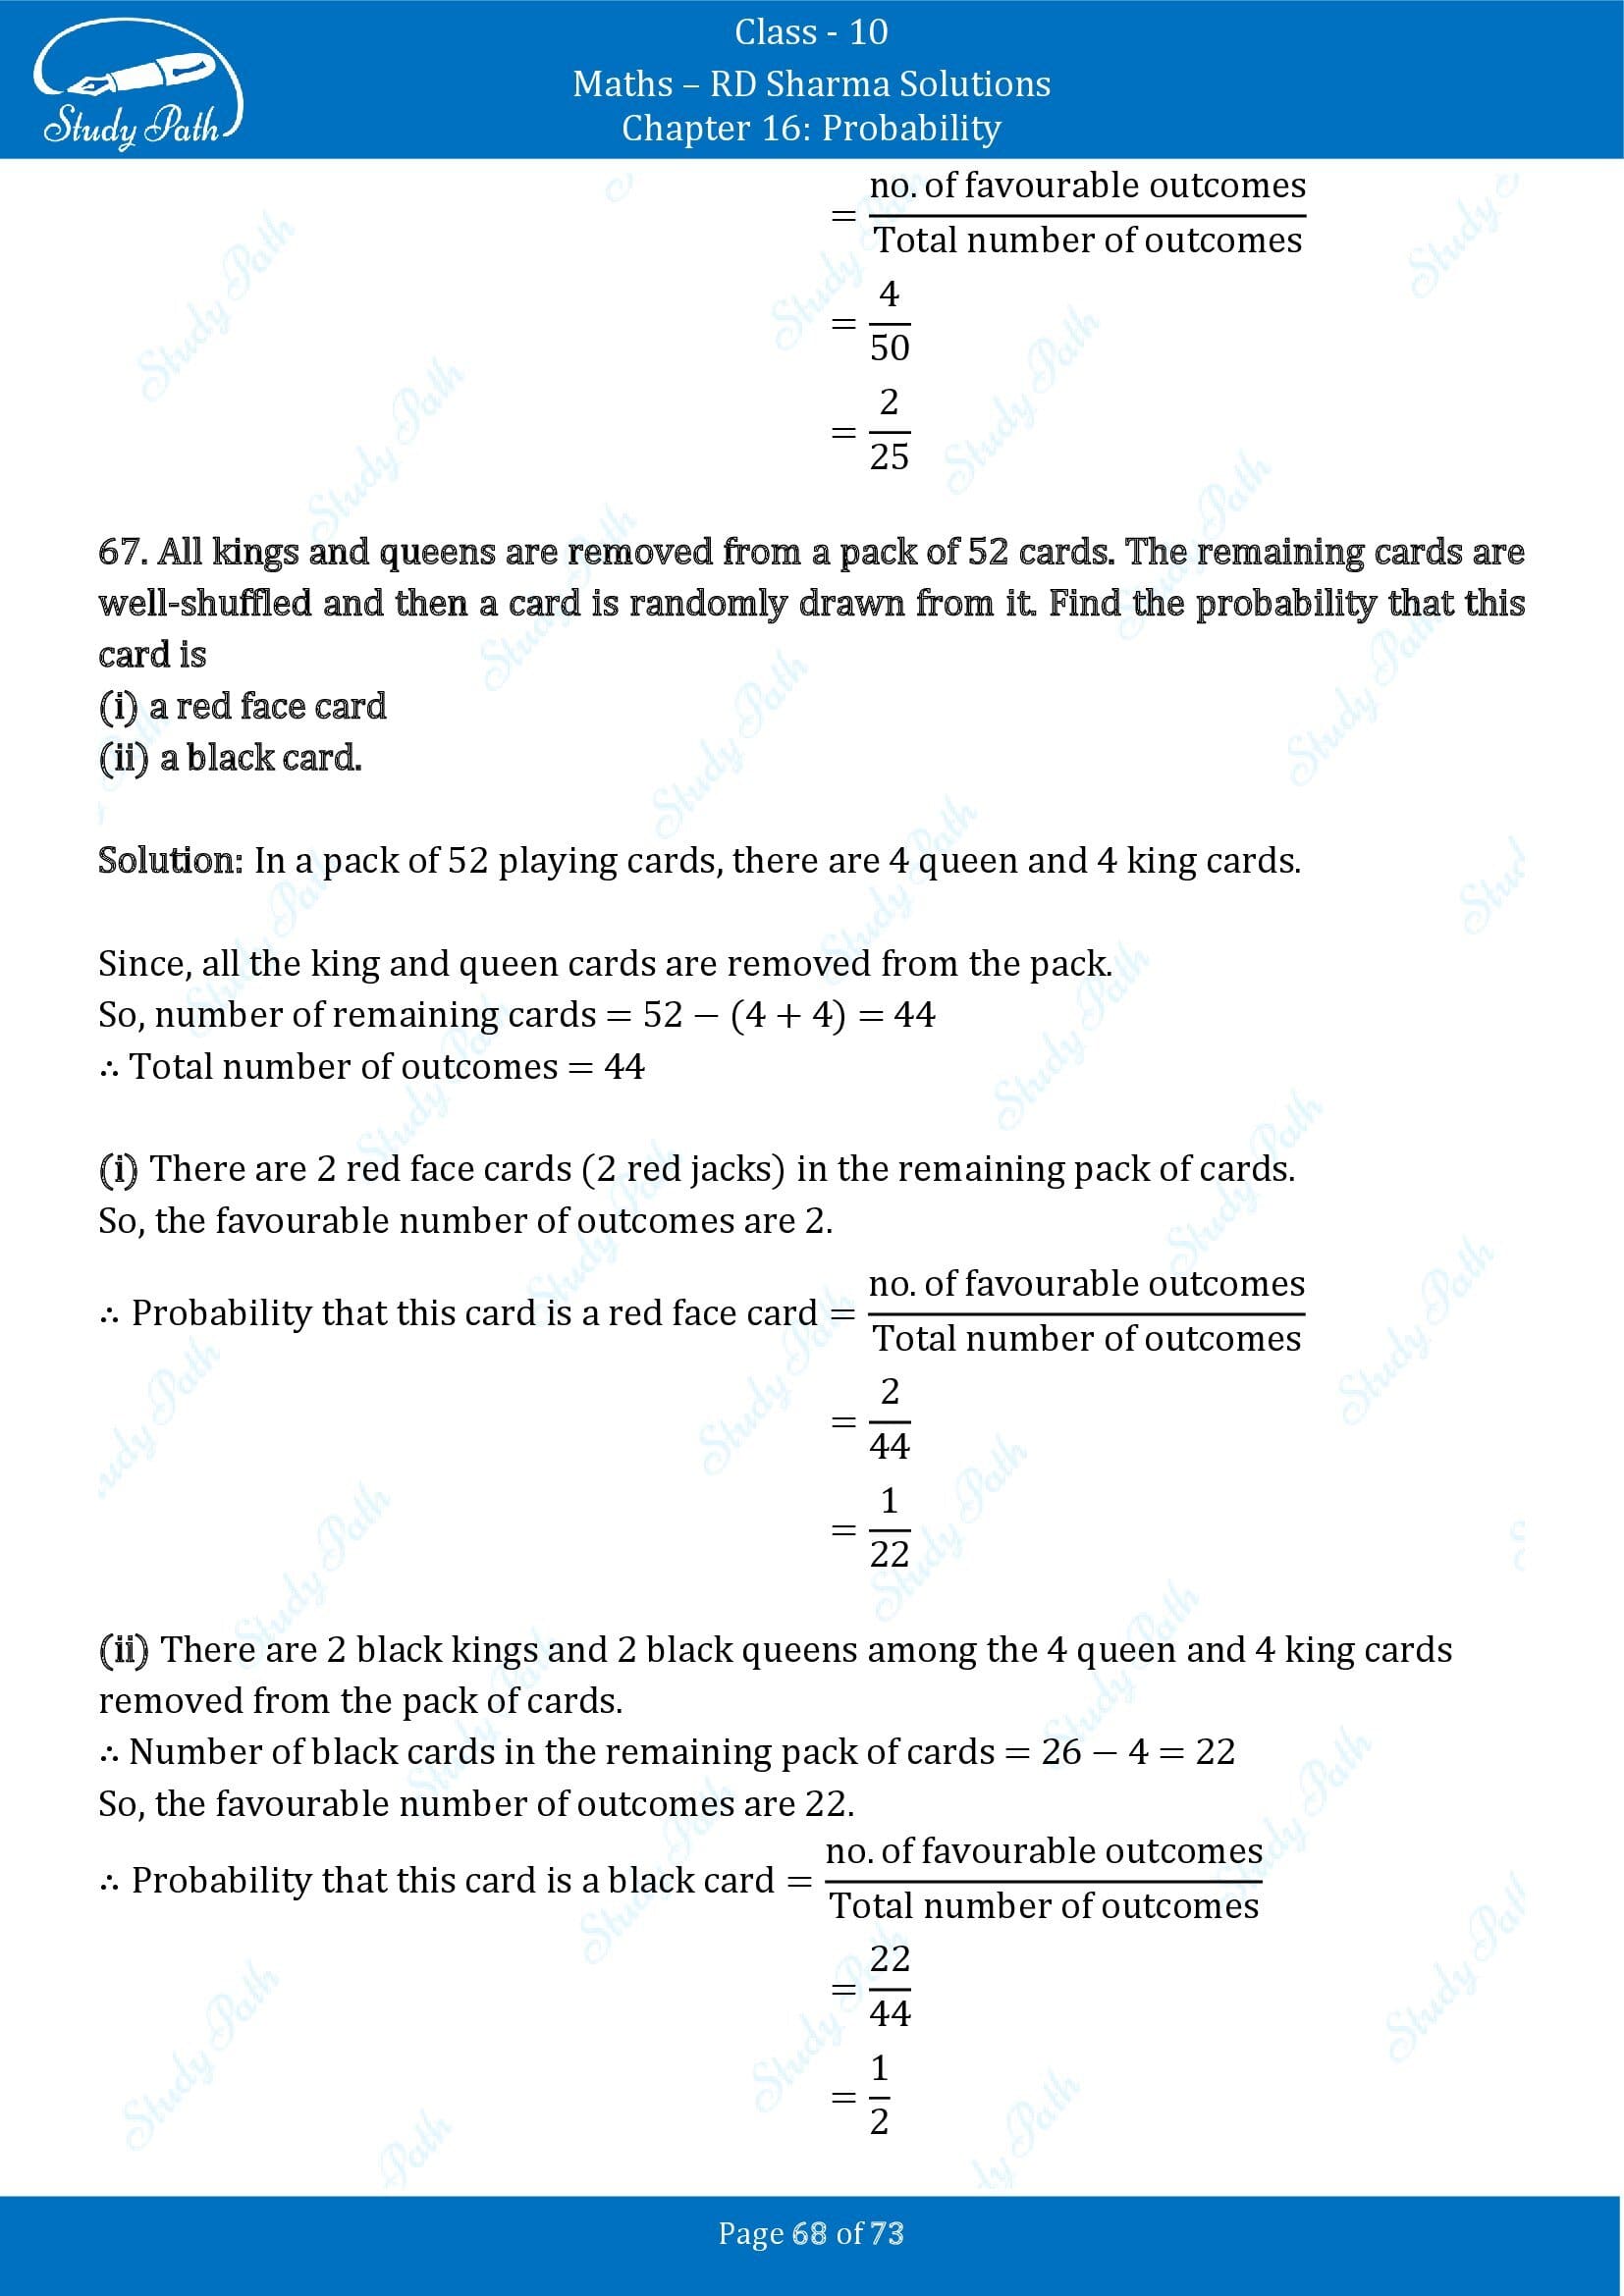 RD Sharma Solutions Class 10 Chapter 16 Probability Exercise 16.1 00068